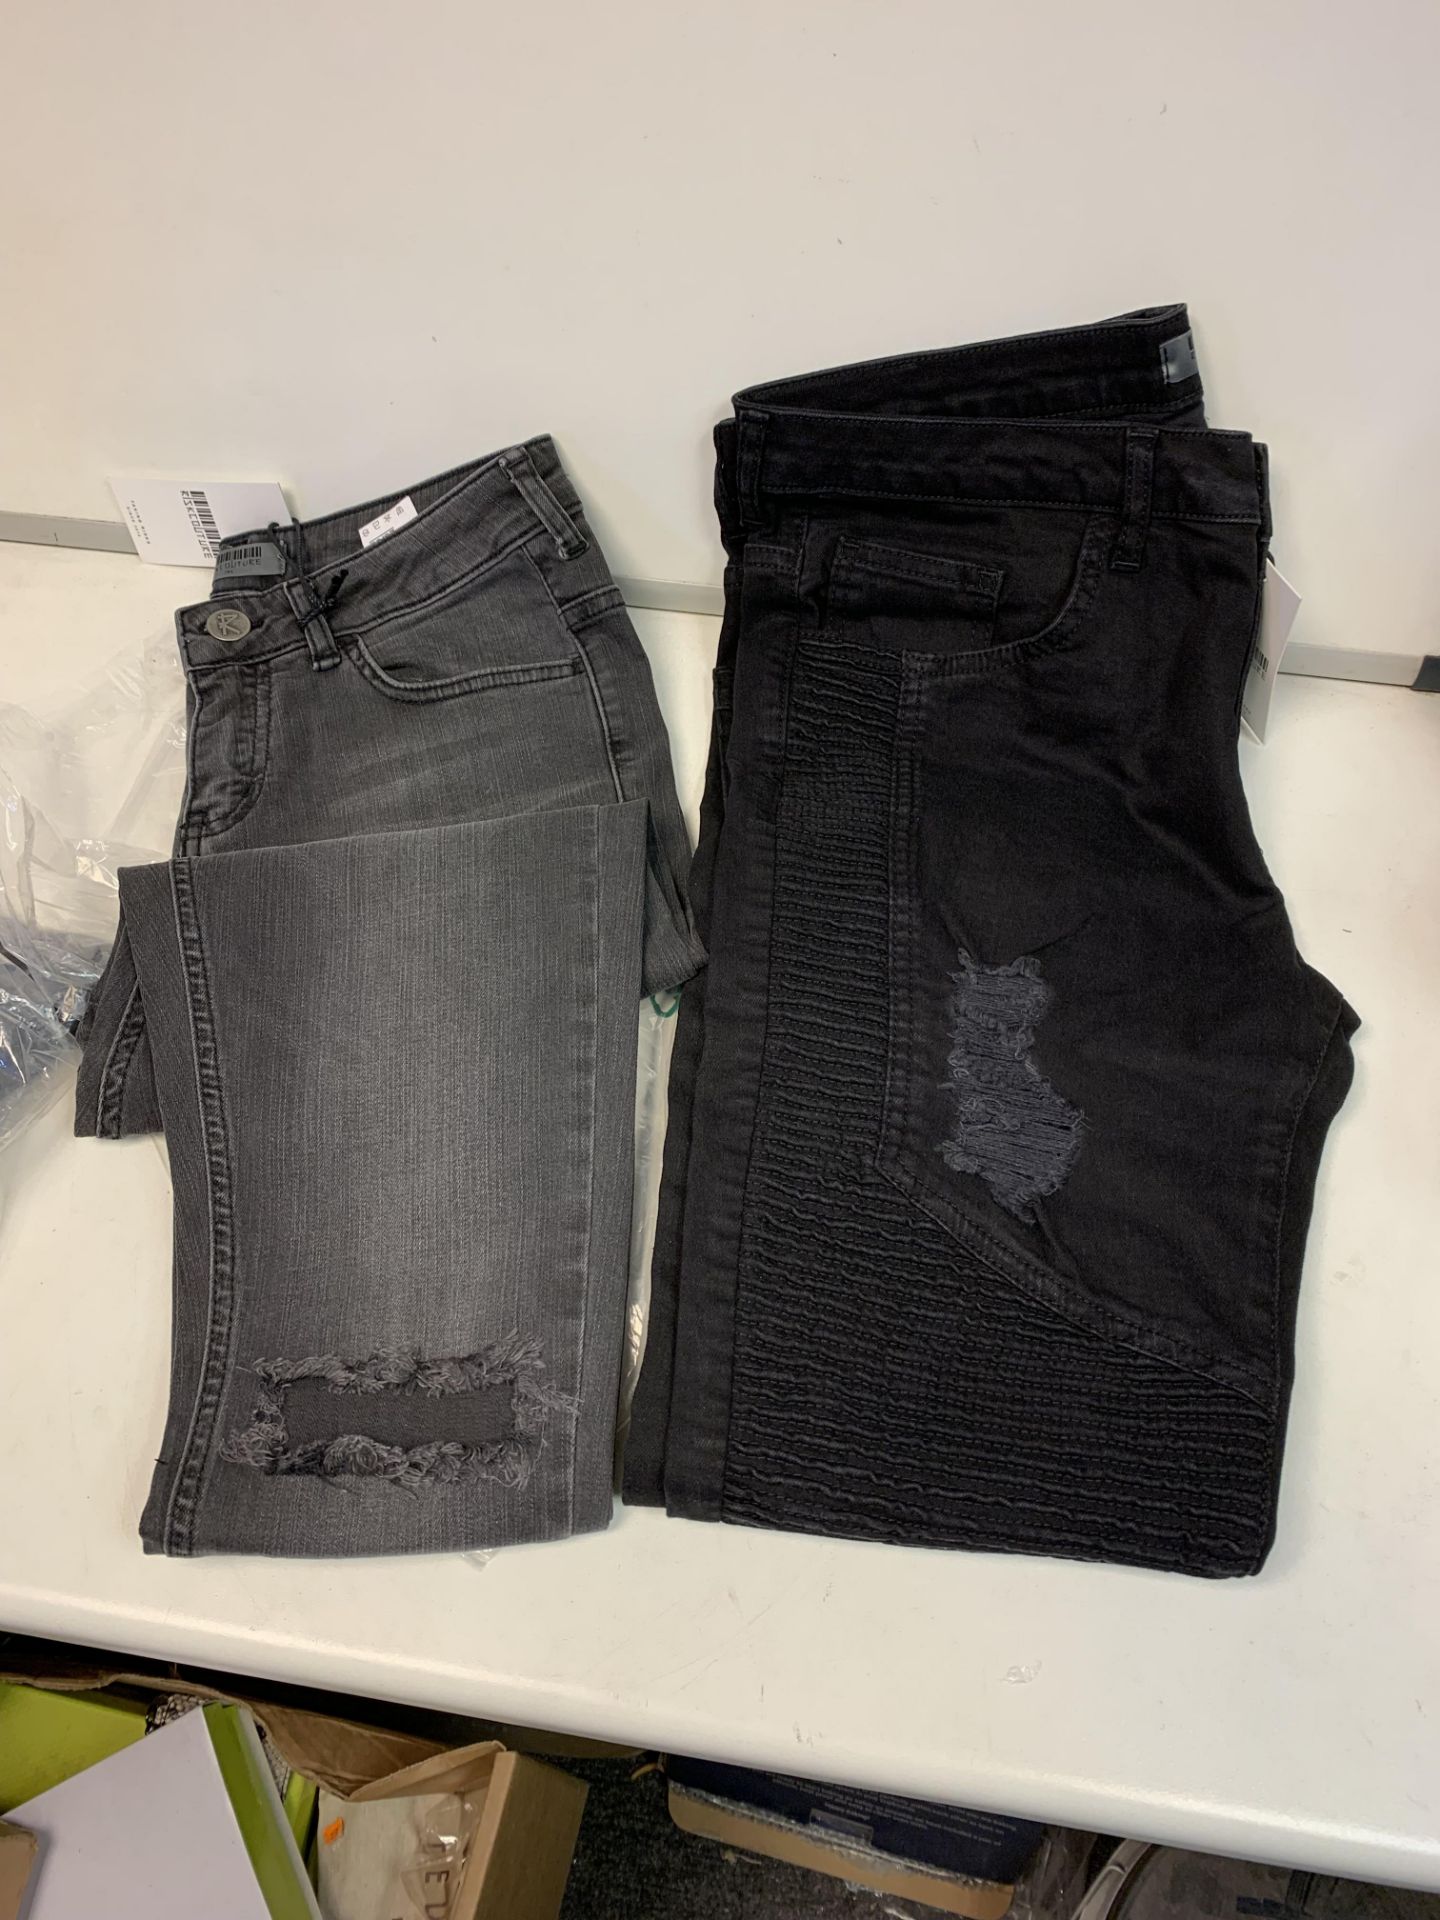 16 X BRAND NEW RISK COUTURE JEANS IN VARIOUS STYLES AND SIZES